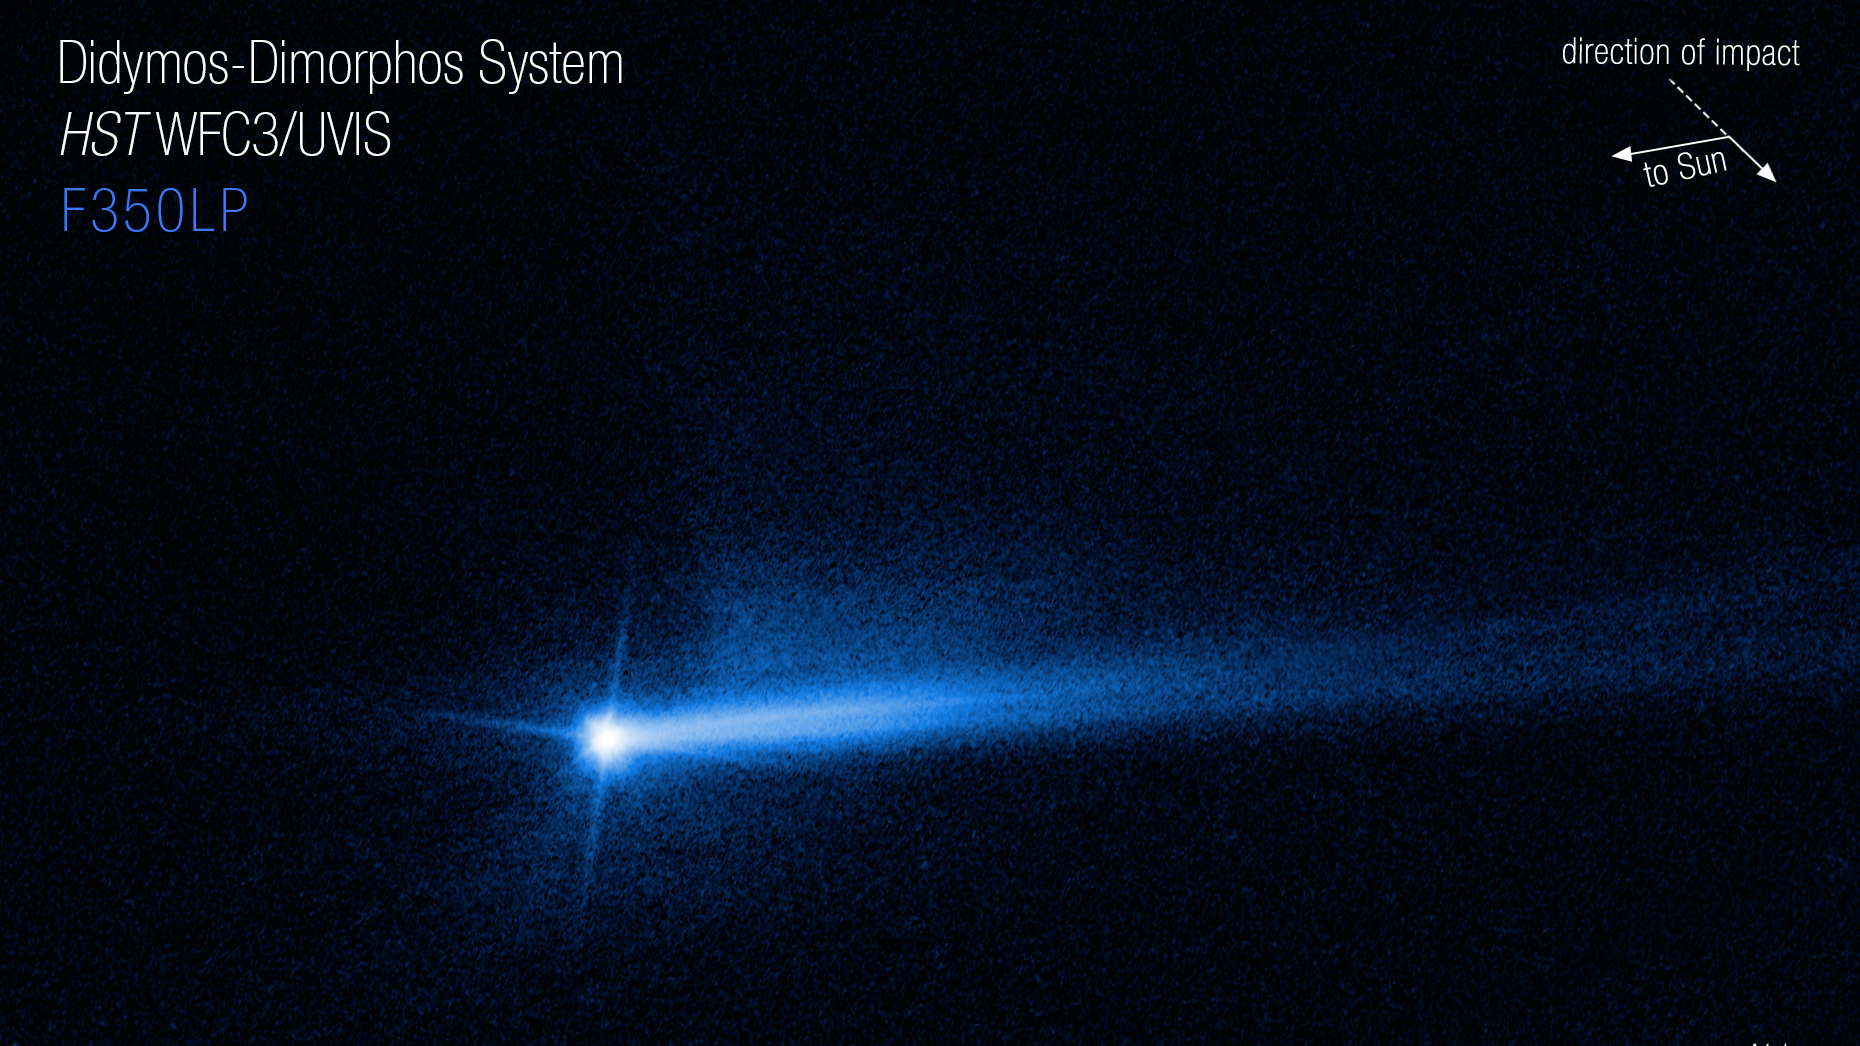 A Hubble Space Telescope image shows a two tails streaming from the asteroid Dimorphos, which the DART spacecraft impacted on Sept. 26, 2022.